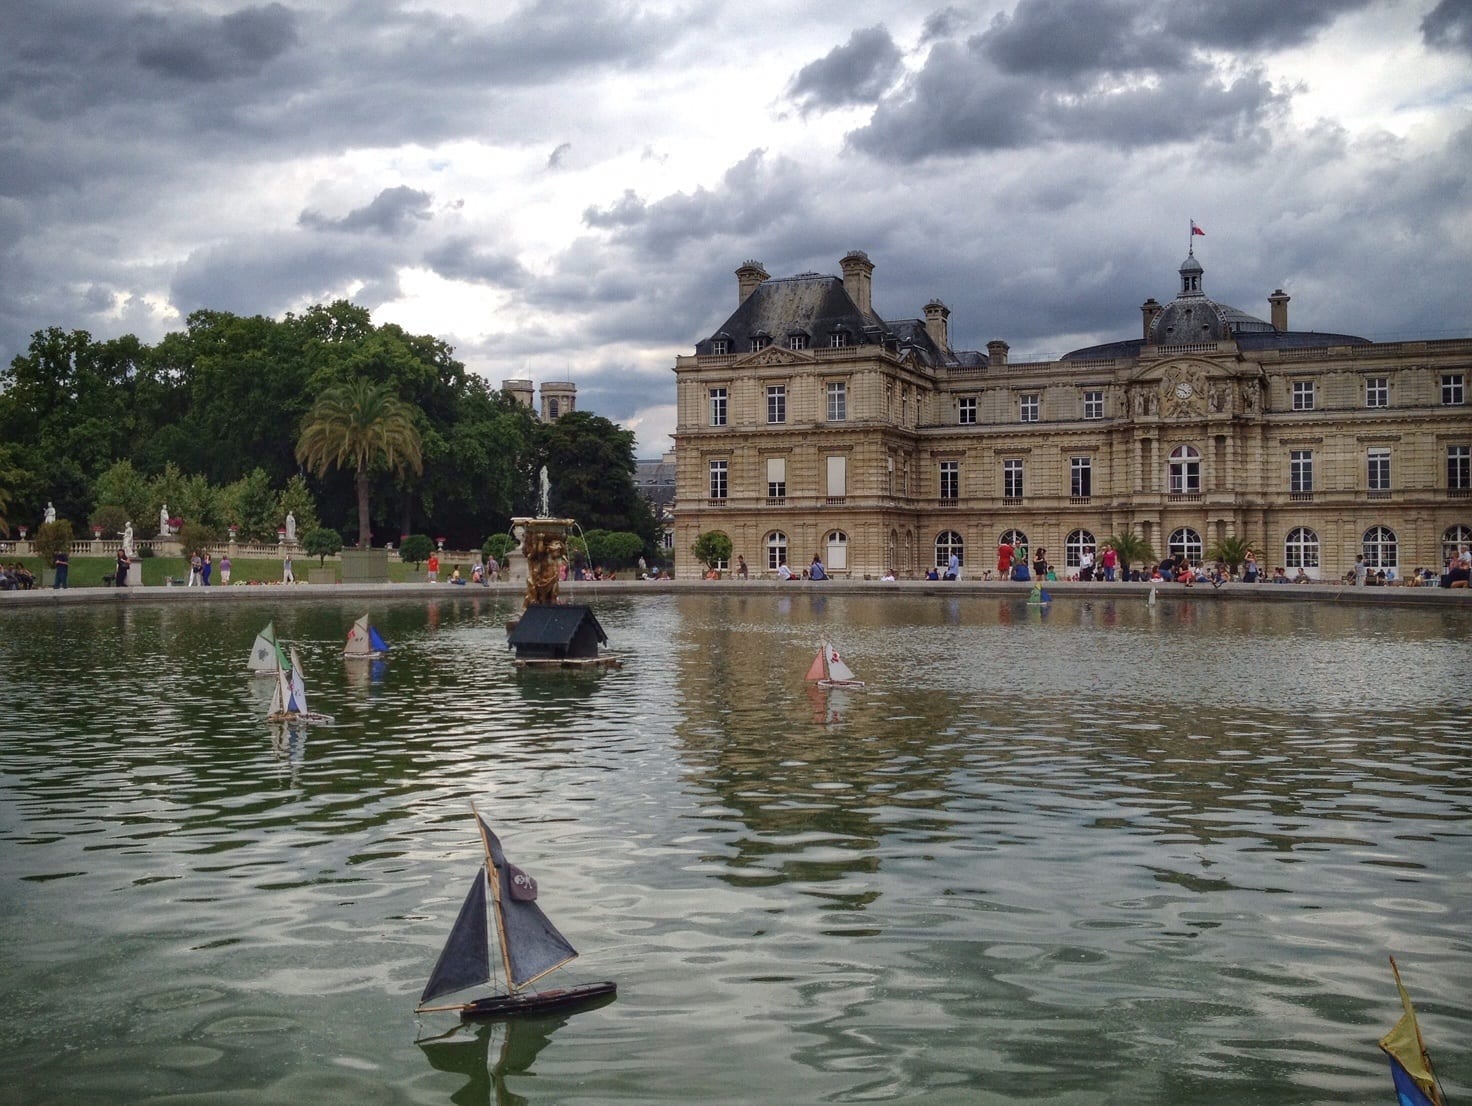 What are the best neighborhoods in Paris? A view of the pond in the Luxembourg Gardens, a sailboat in the water, gray clouds overhead.